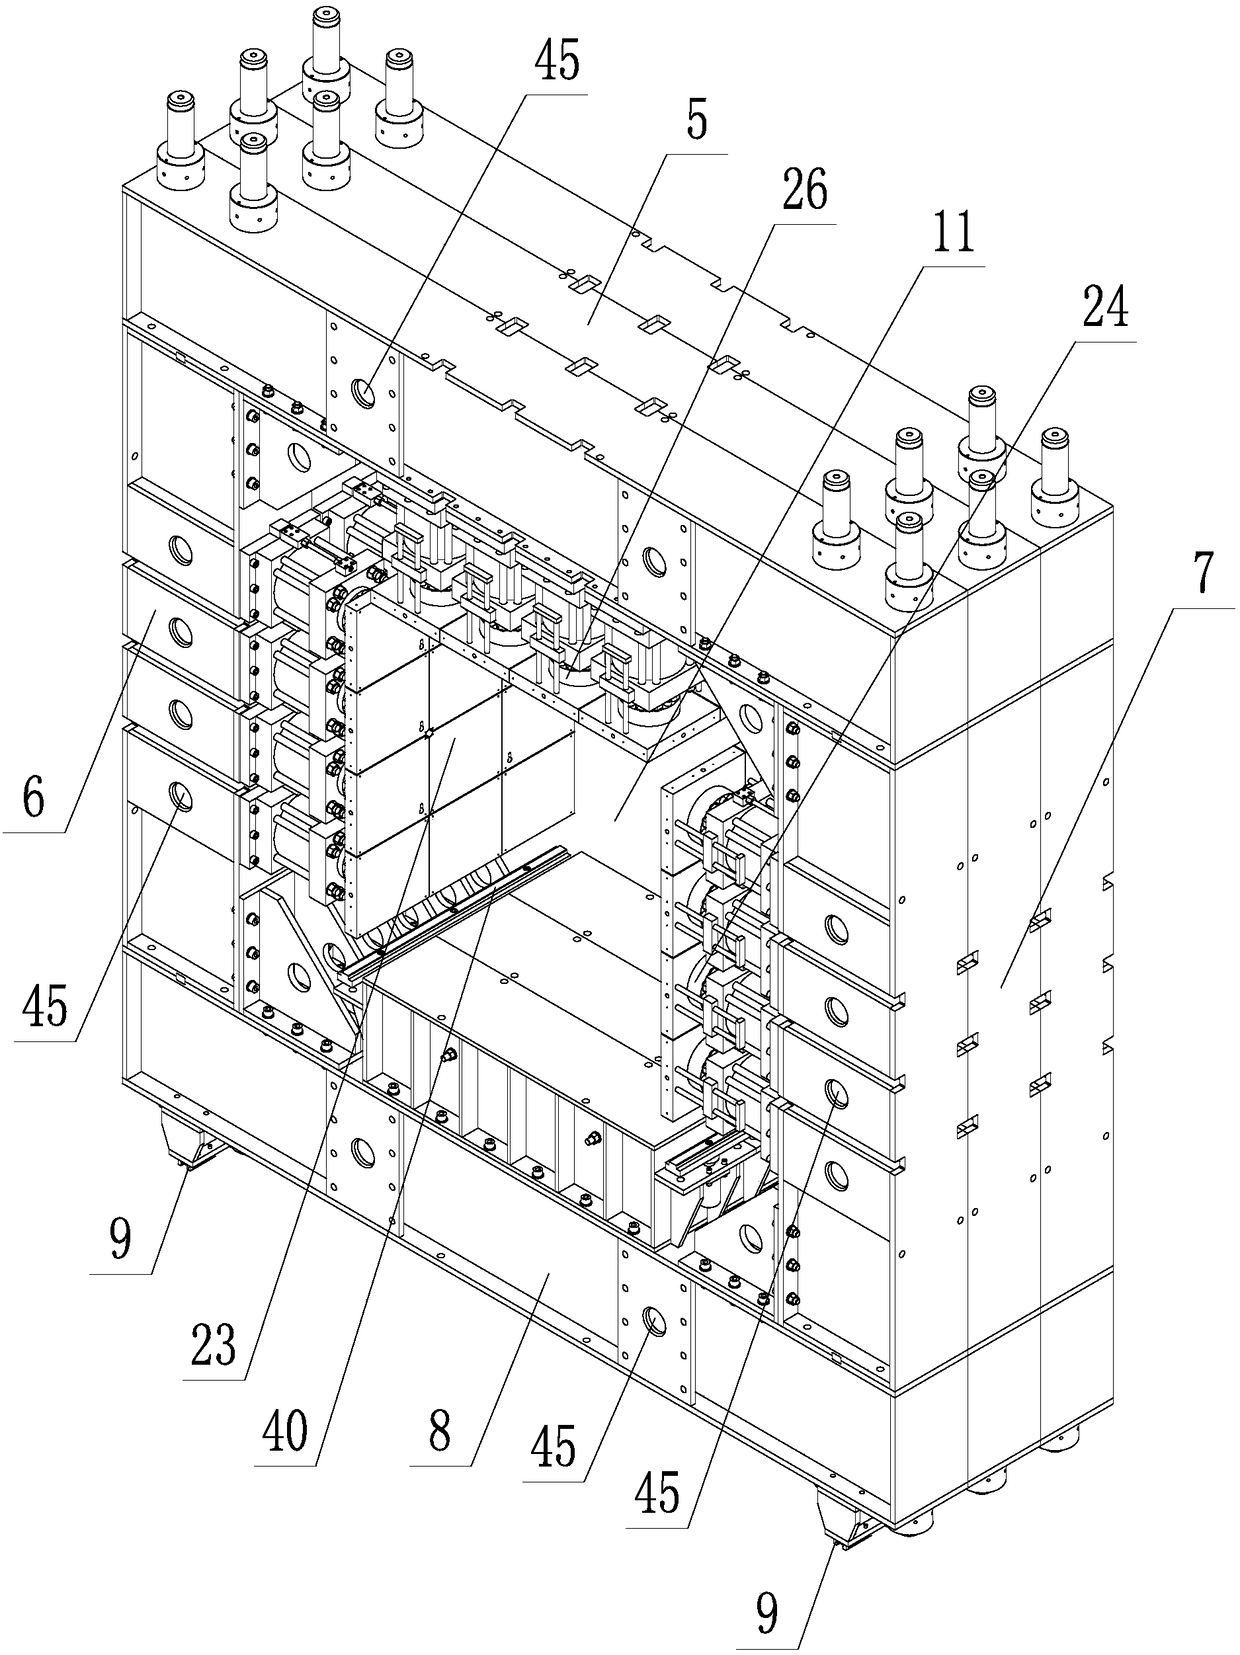 High-rigidity prestress loading framework structure for large-scale three-dimensional physical model test